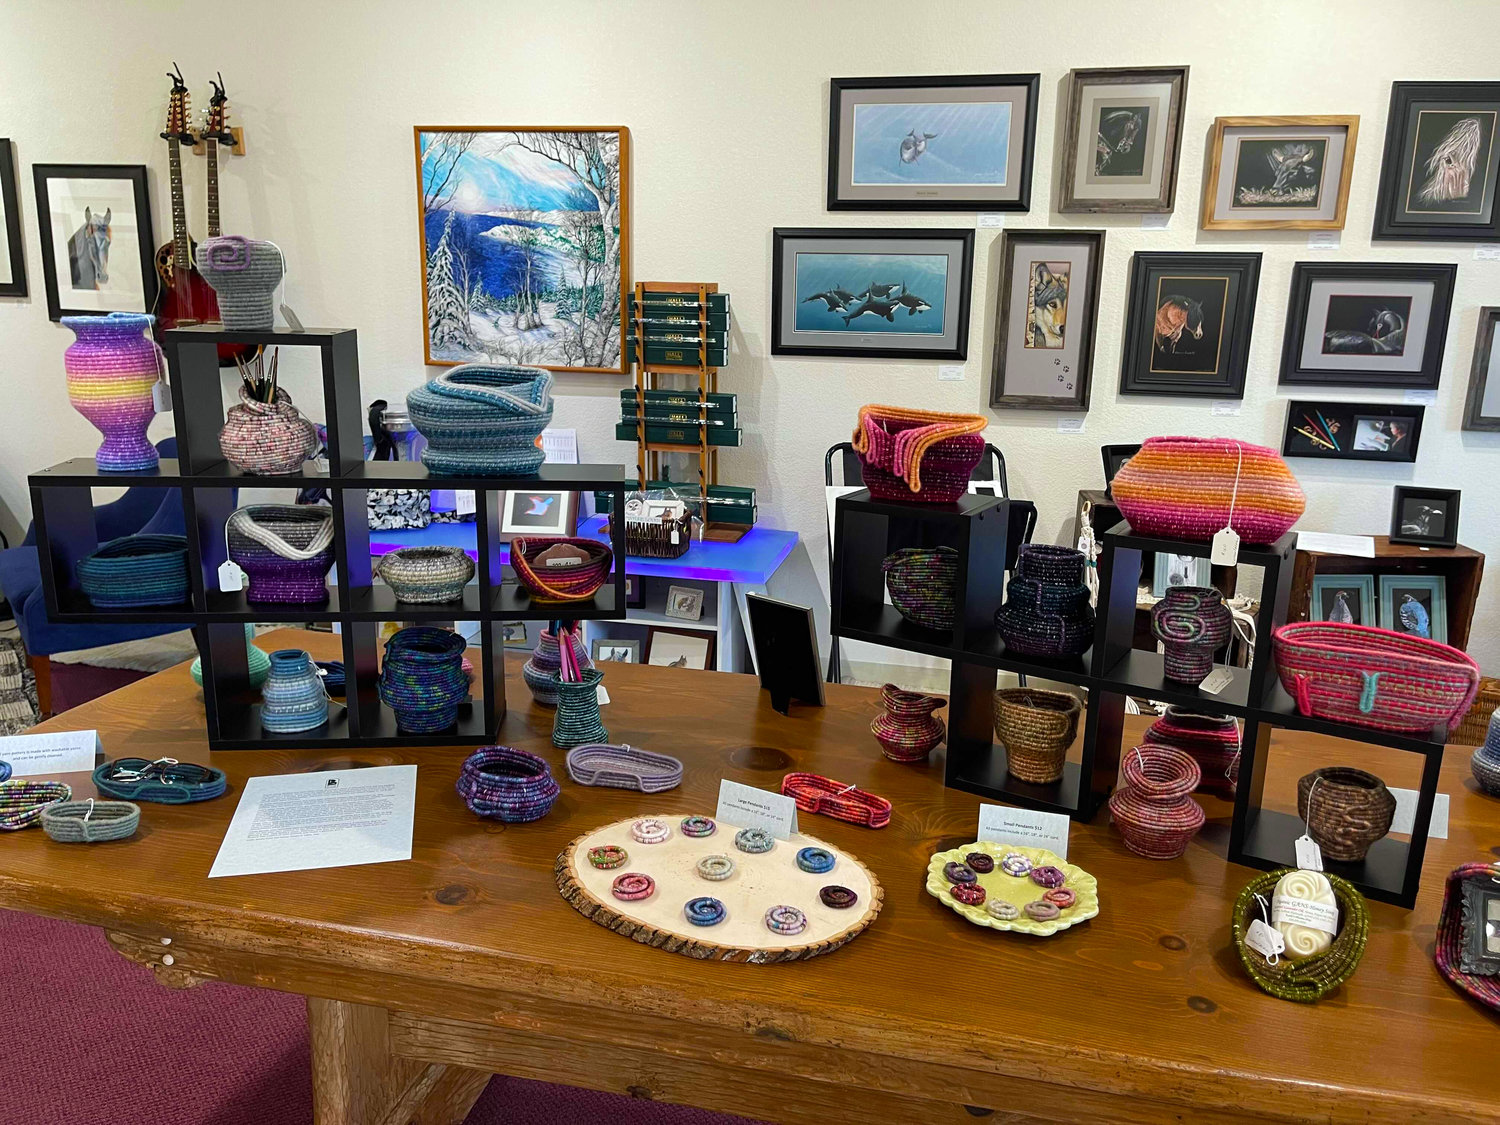 The InGenius! Local Artisan Gallery & Boutique will showcase local artistry with a starting lineup of artisans from Yelm, Rainier, Tenino, Rochester and Chehalis. Already open for business, InGenious is located at 207 First St. S., in Yelm across from Yelm City Park, where JZ Rose used to be housed. The gallery is open from 11 a.m. to 6 p.m. Tuesday through Saturday.